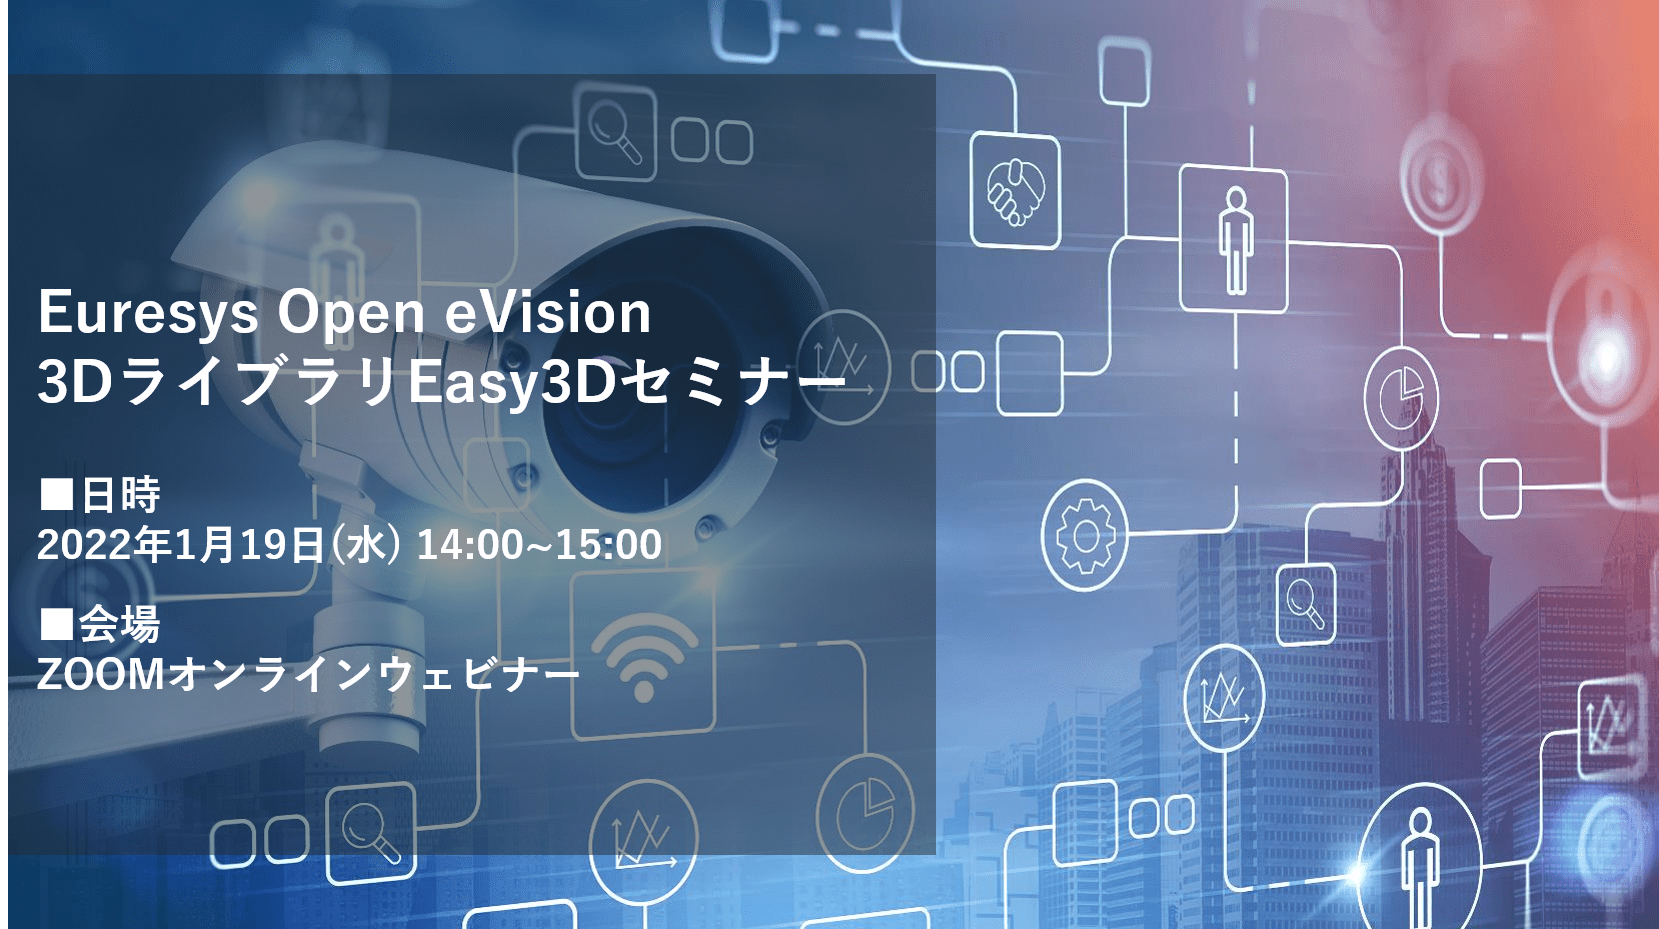 Euresys Open eVision 3DライブラリEasy3Dセミナー